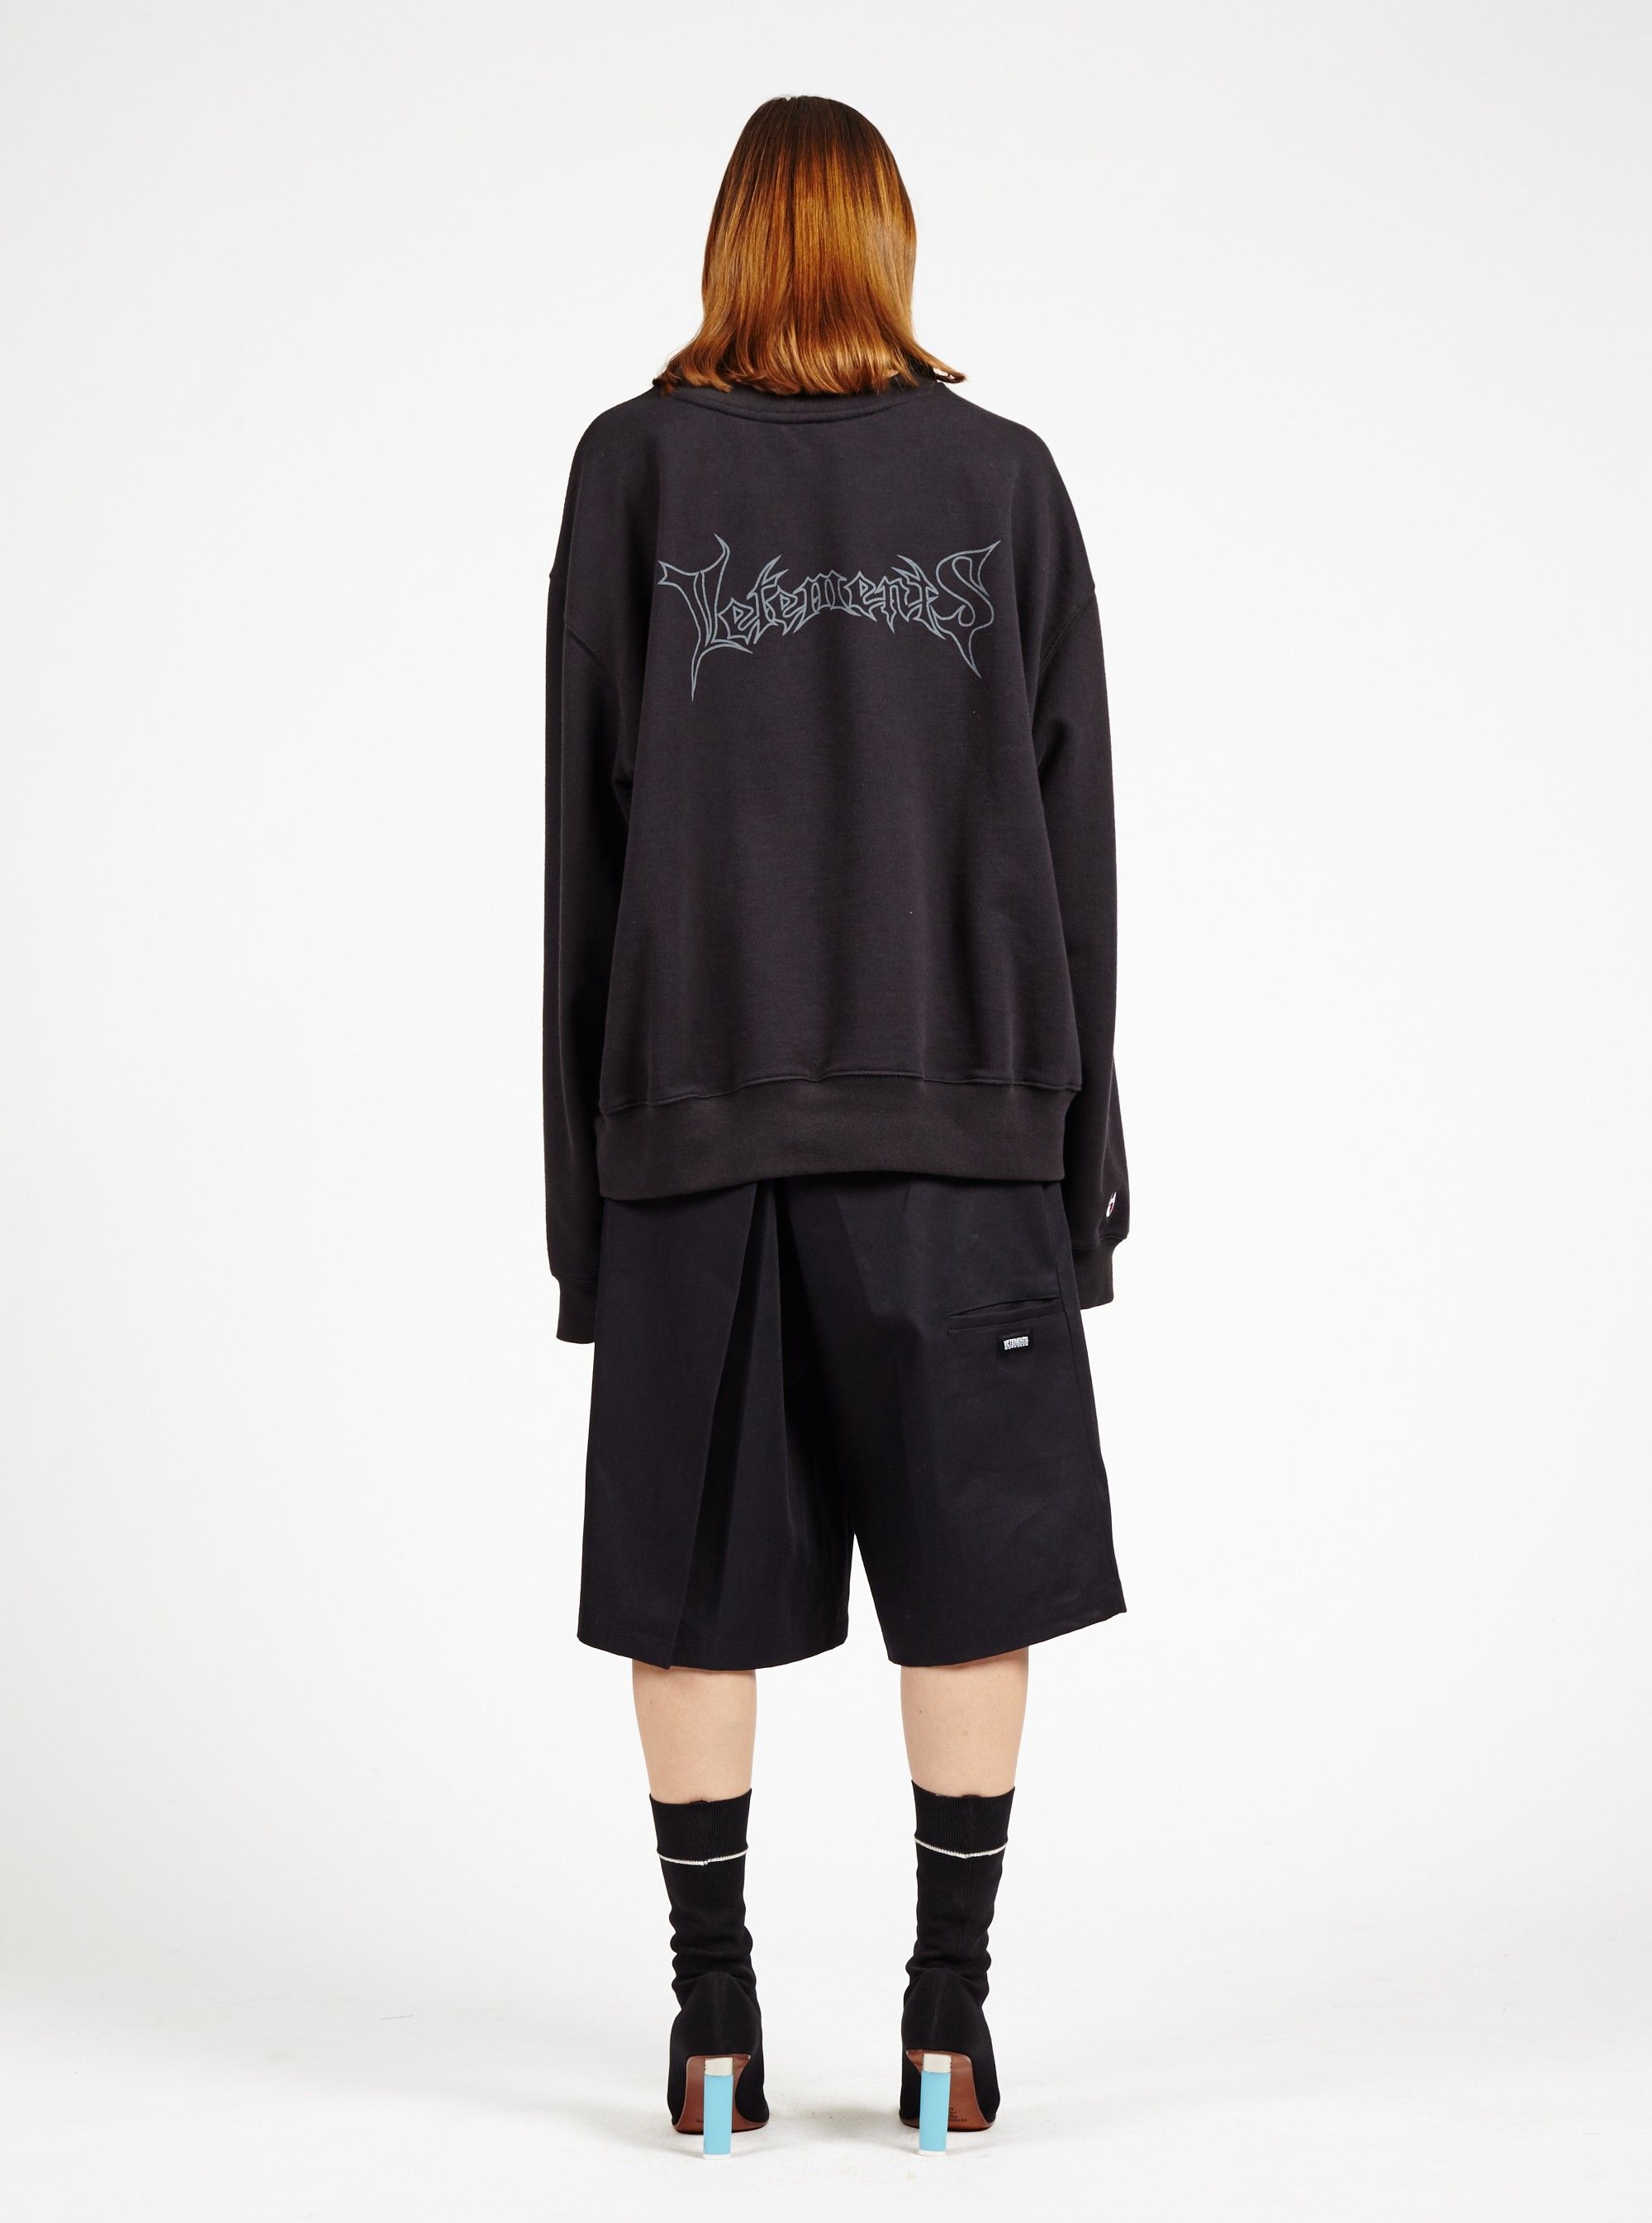 SS16_Vetements_SS16_Selection3